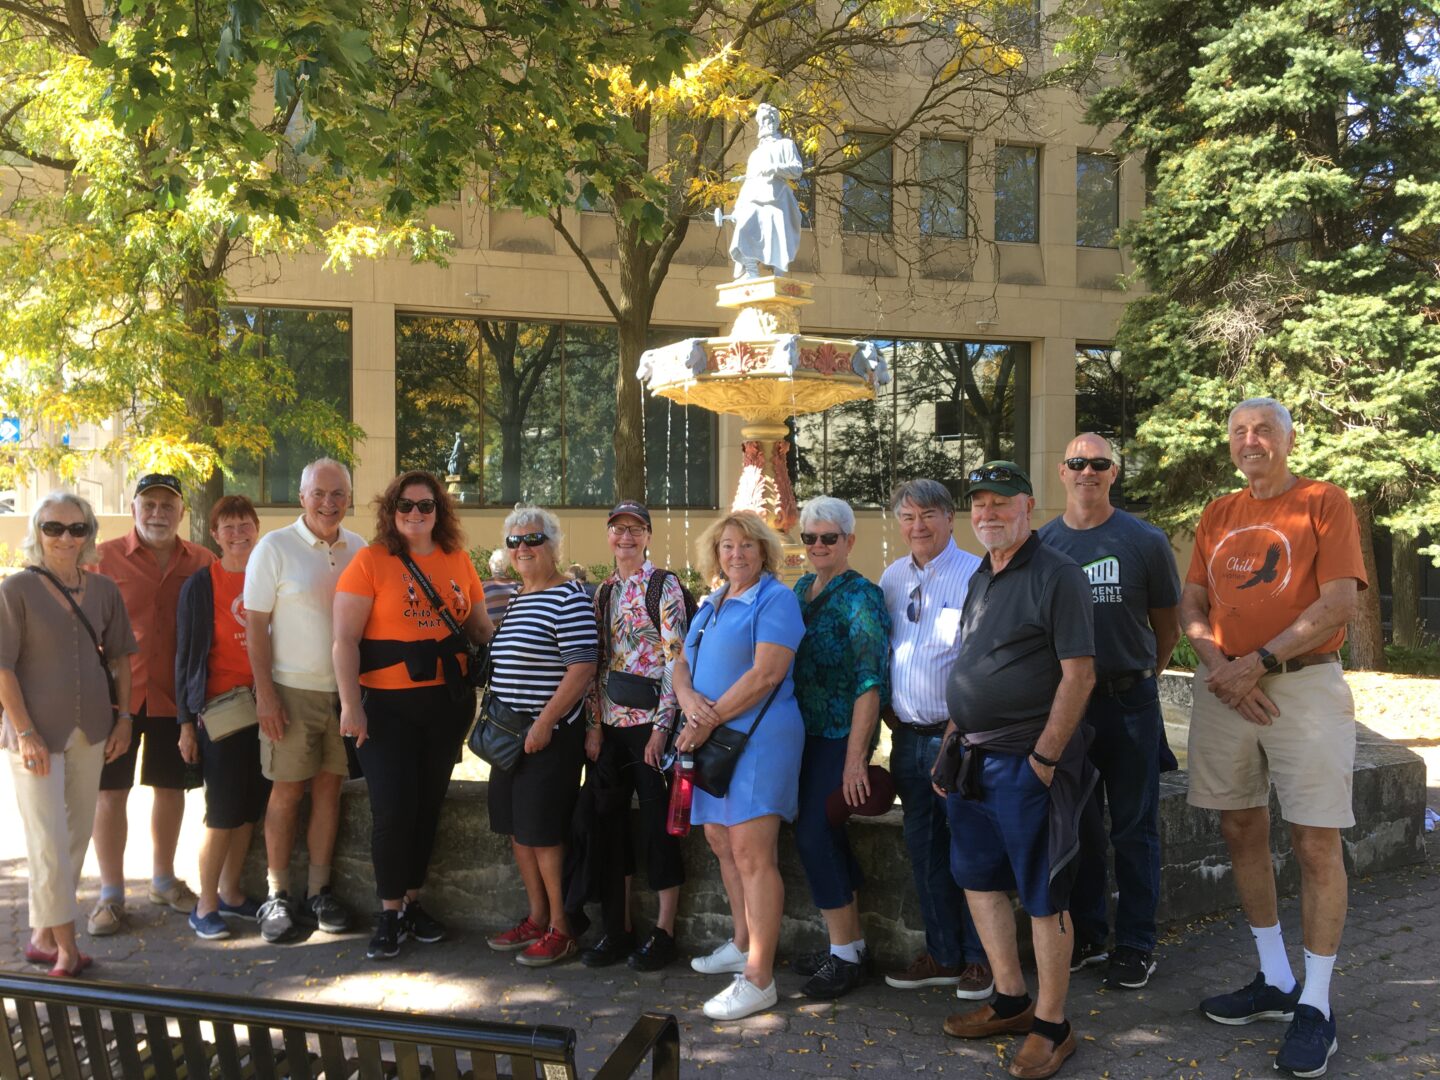 Group of people posing together in front of a fountain - they are on a walking tour